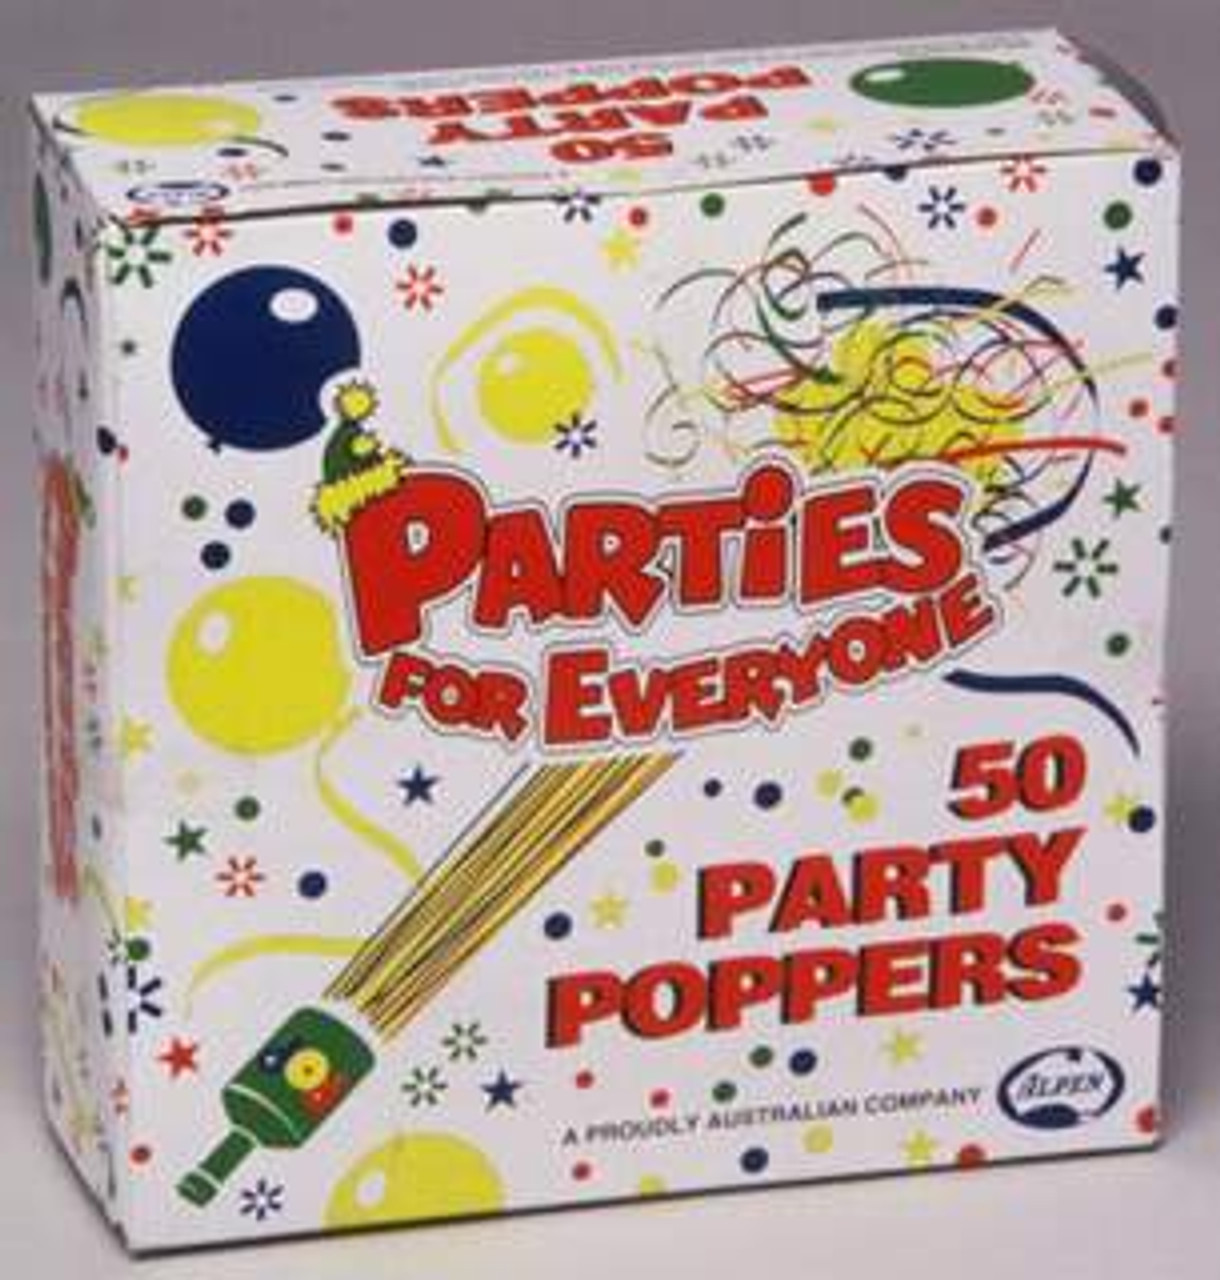 PARTY　POPPERS　Shop　Sydney　PACK　50　Party